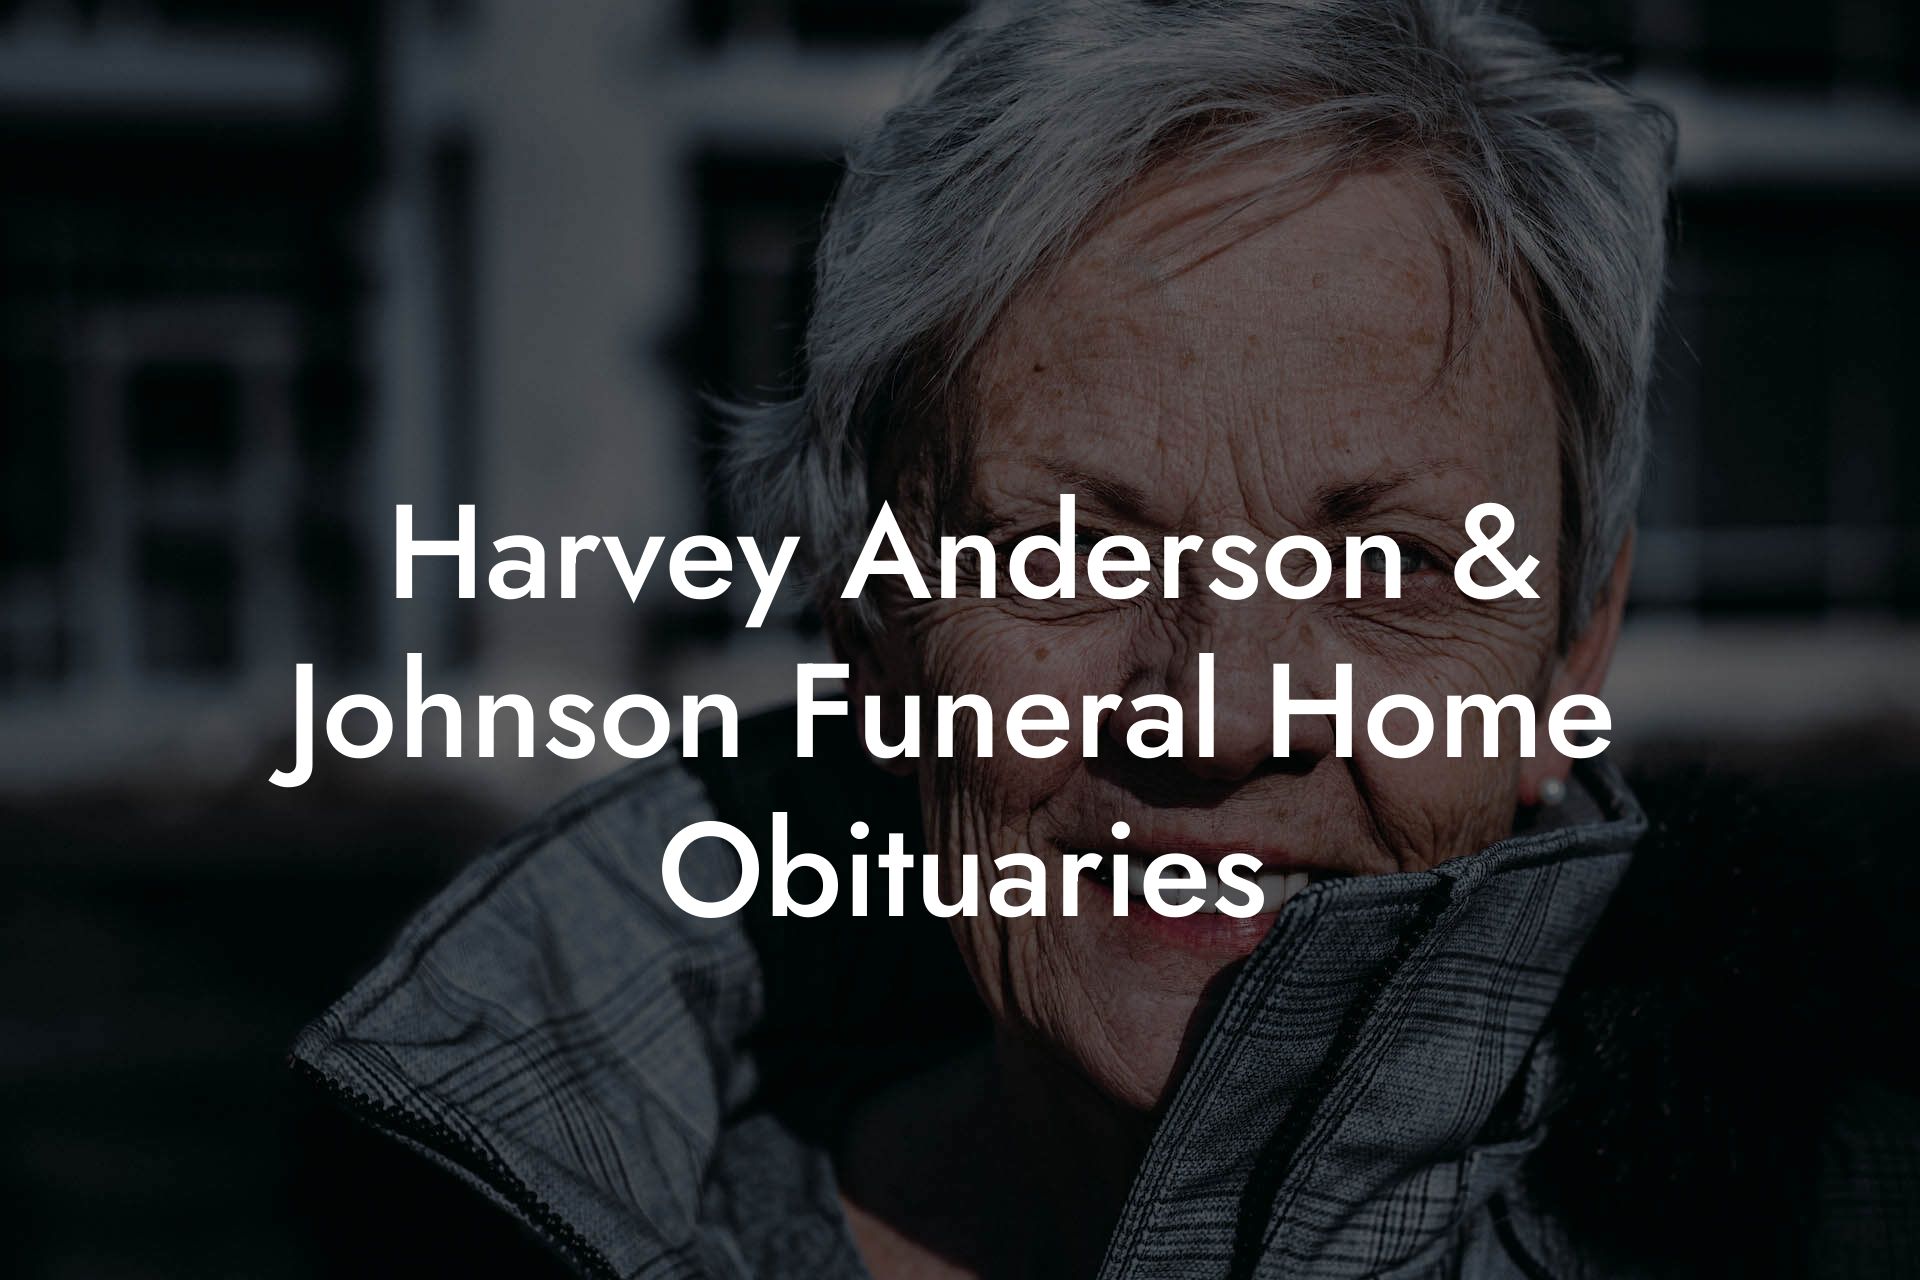 Harvey Anderson & Johnson Funeral Home Obituaries